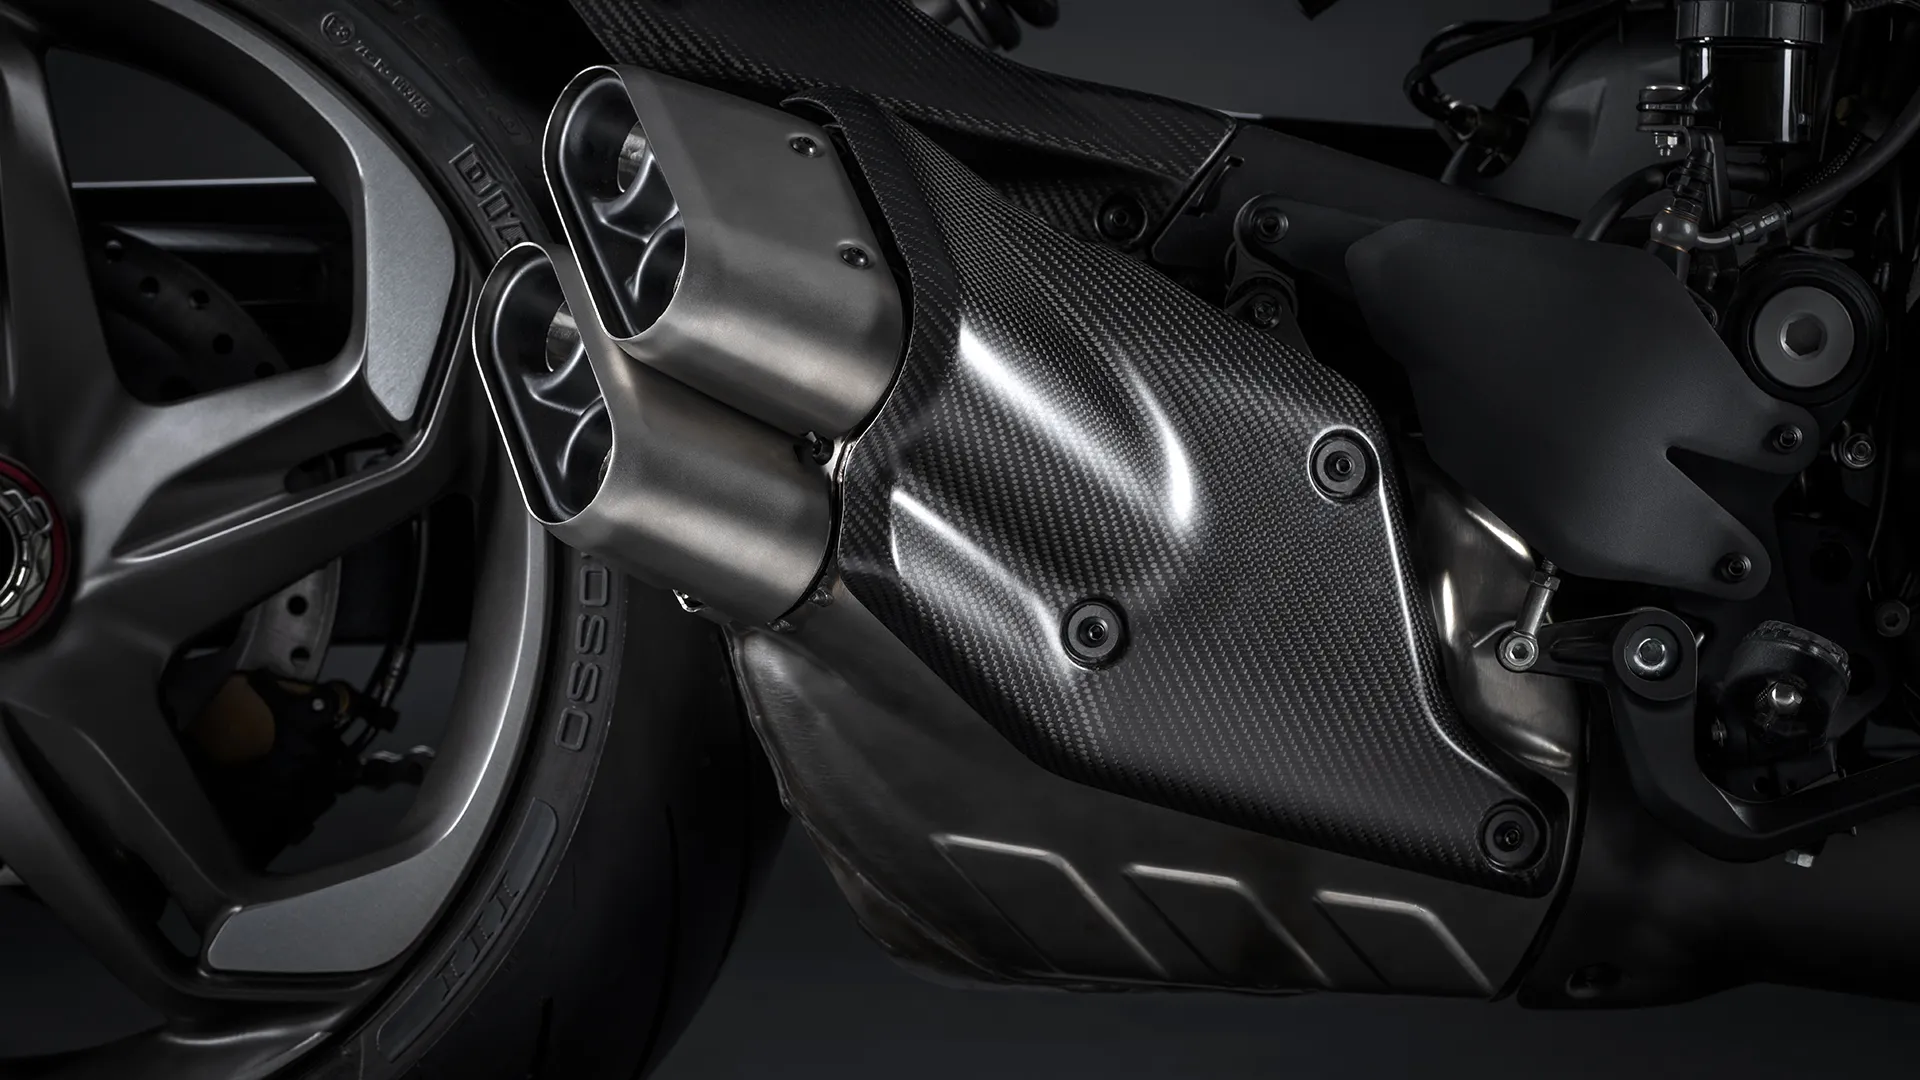 Ducati-Diavel-V4-for-Bentley-DWP24-Overview-gallery-1920x1080-12